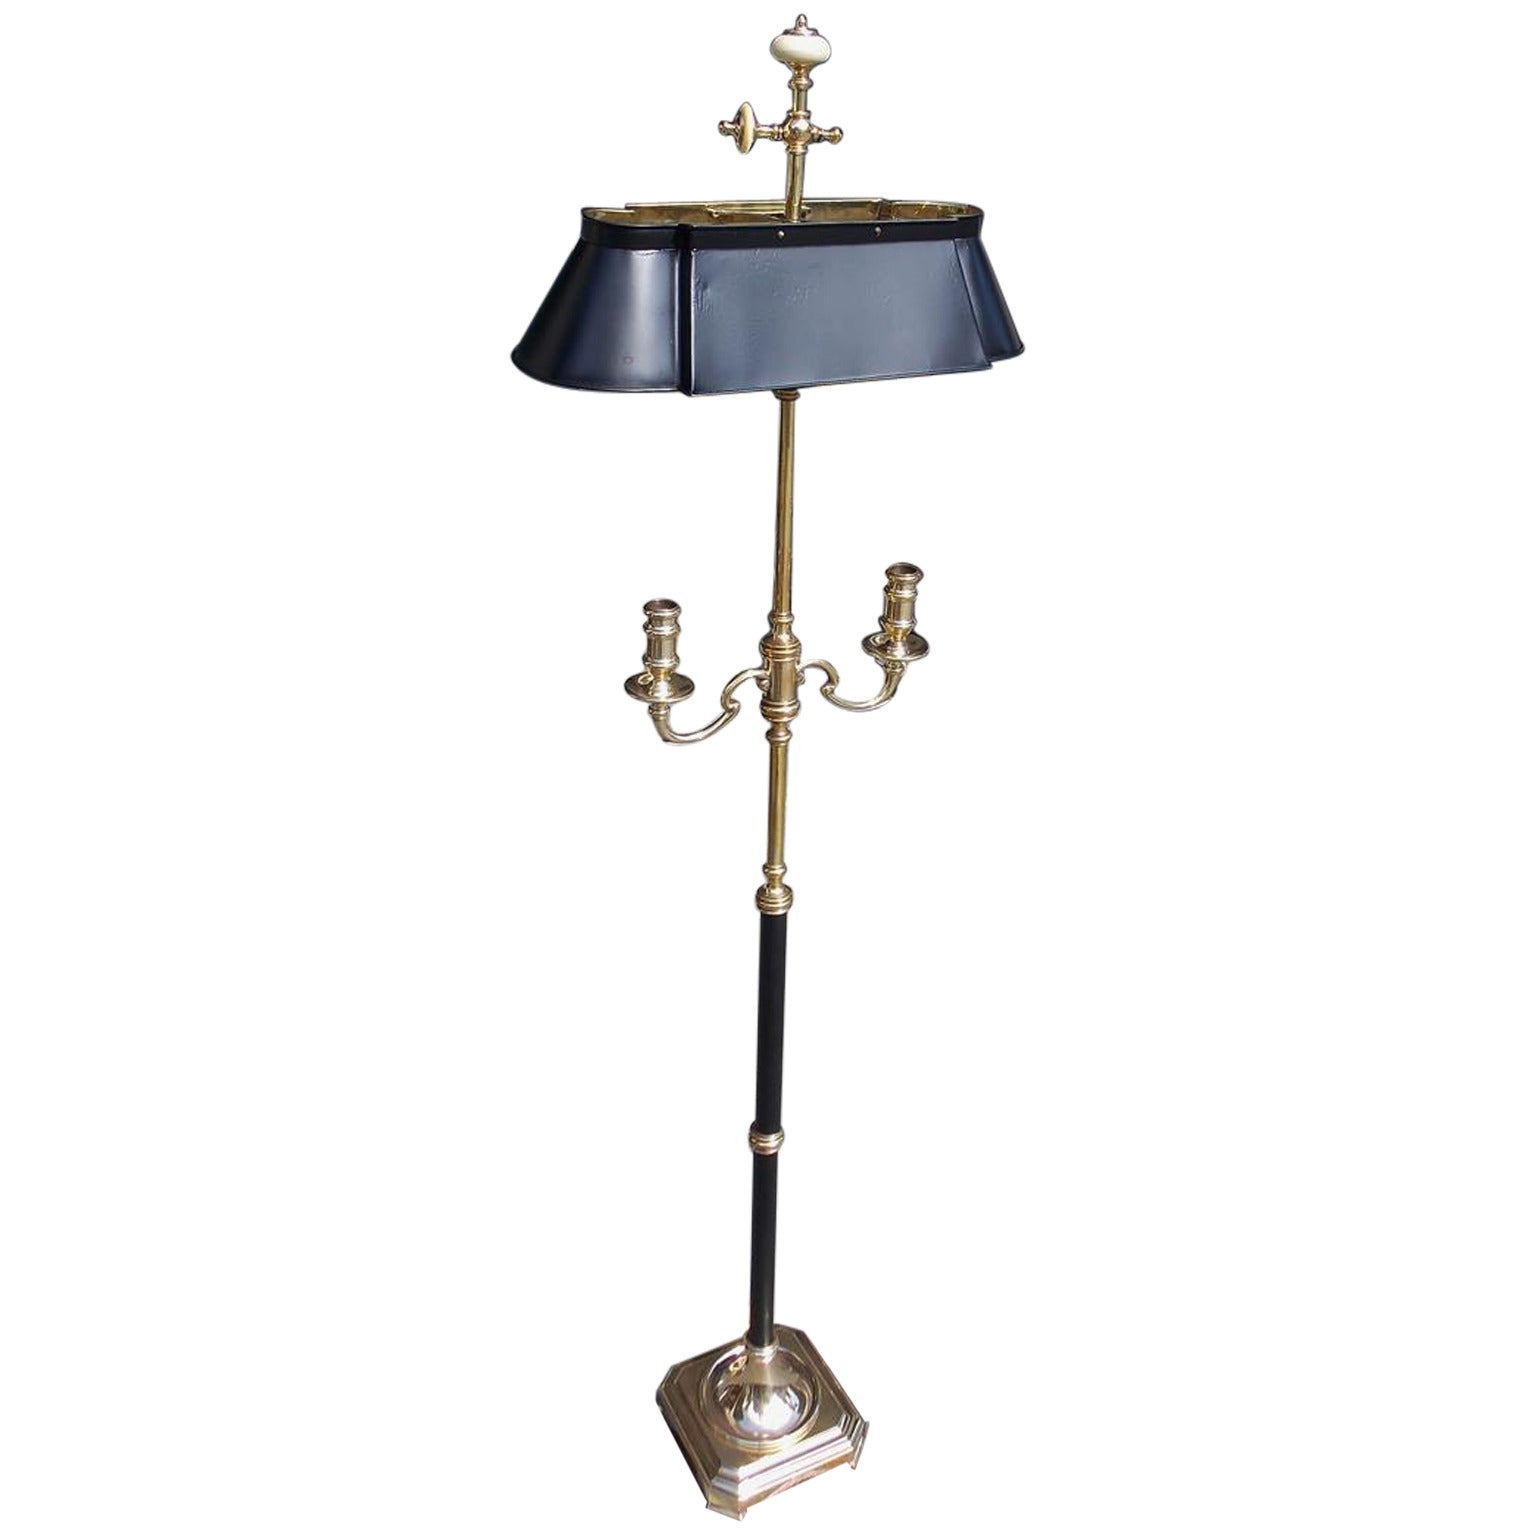 American Brass and Tin Boule Floor Lamp, Circa 1880 For Sale